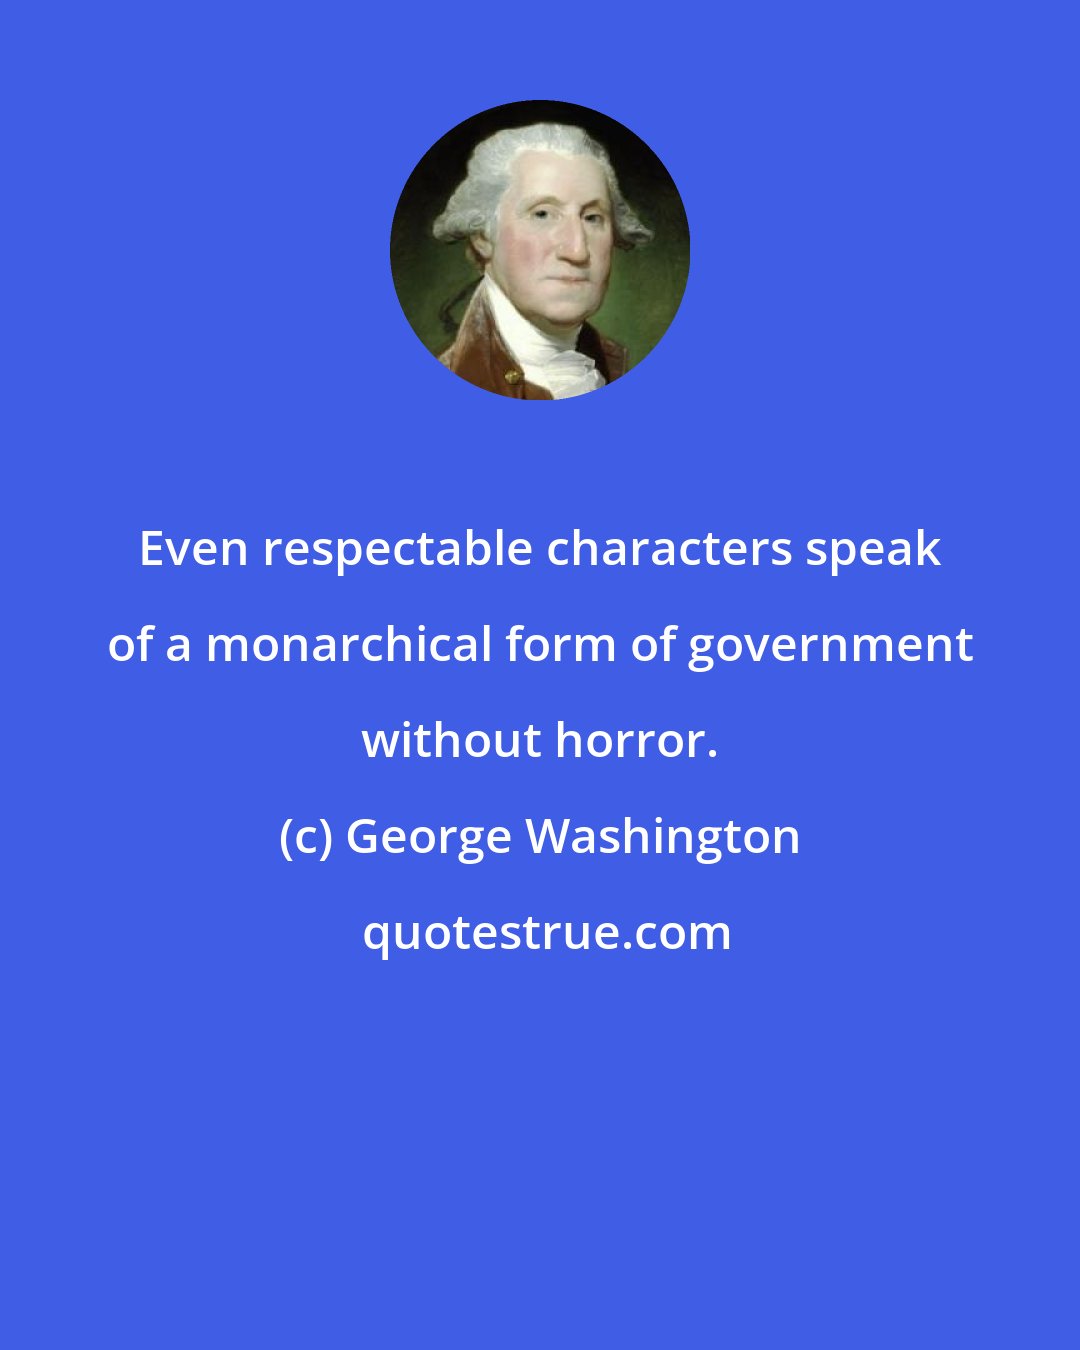 George Washington: Even respectable characters speak of a monarchical form of government without horror.